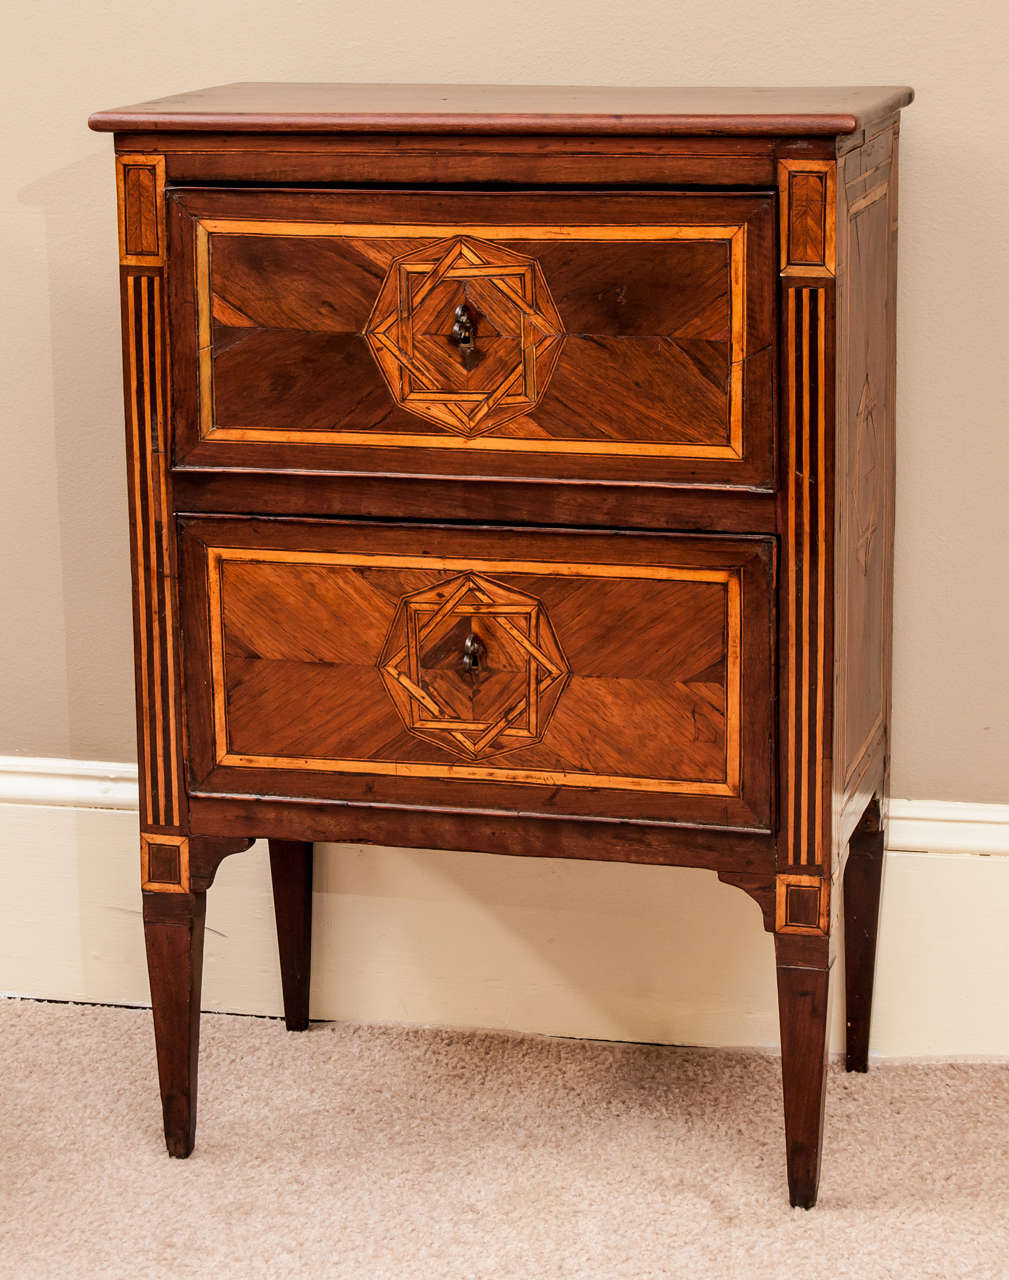 This commode has an inlay of the  eight pointed star on drawer fronts. Inlaid reeded stiles on front and inlay on sides. Original brass key pulls, restored old French polish, small size means it has a multitude of uses.